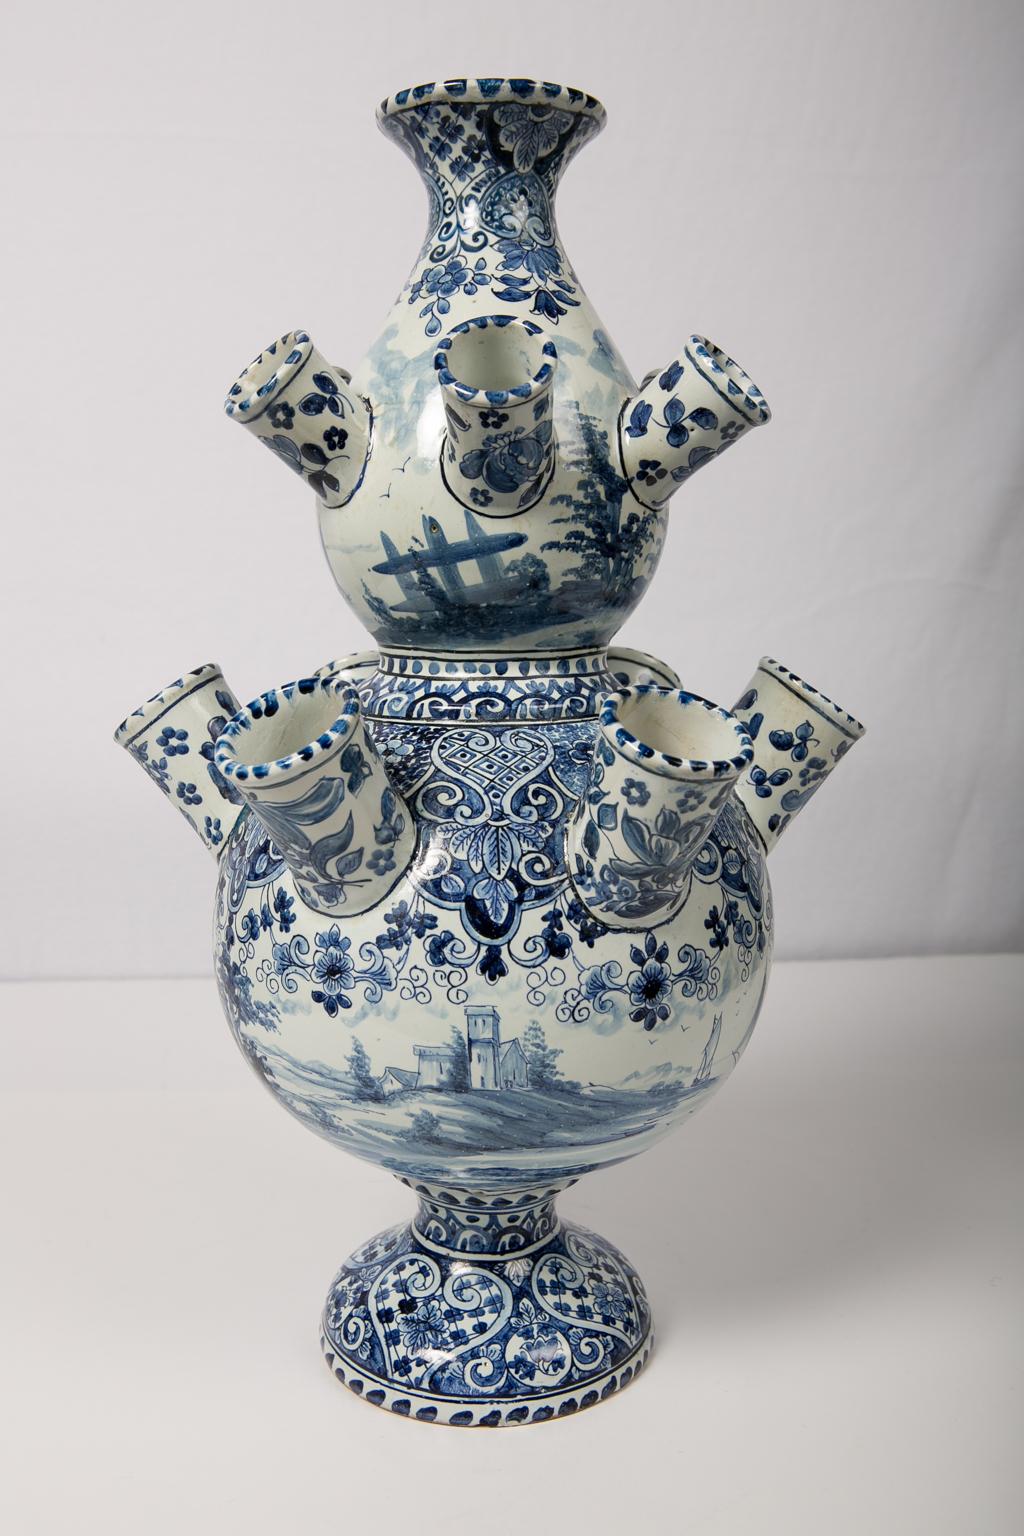 Antique Dutch delft large blue and white tulipiere (tulip holder) in a double gourd shape with 12 spouts for tulips, and an opening at the top for water. The circular body is decorated in cobalt blue featuring traditional scenes of sailboats and a